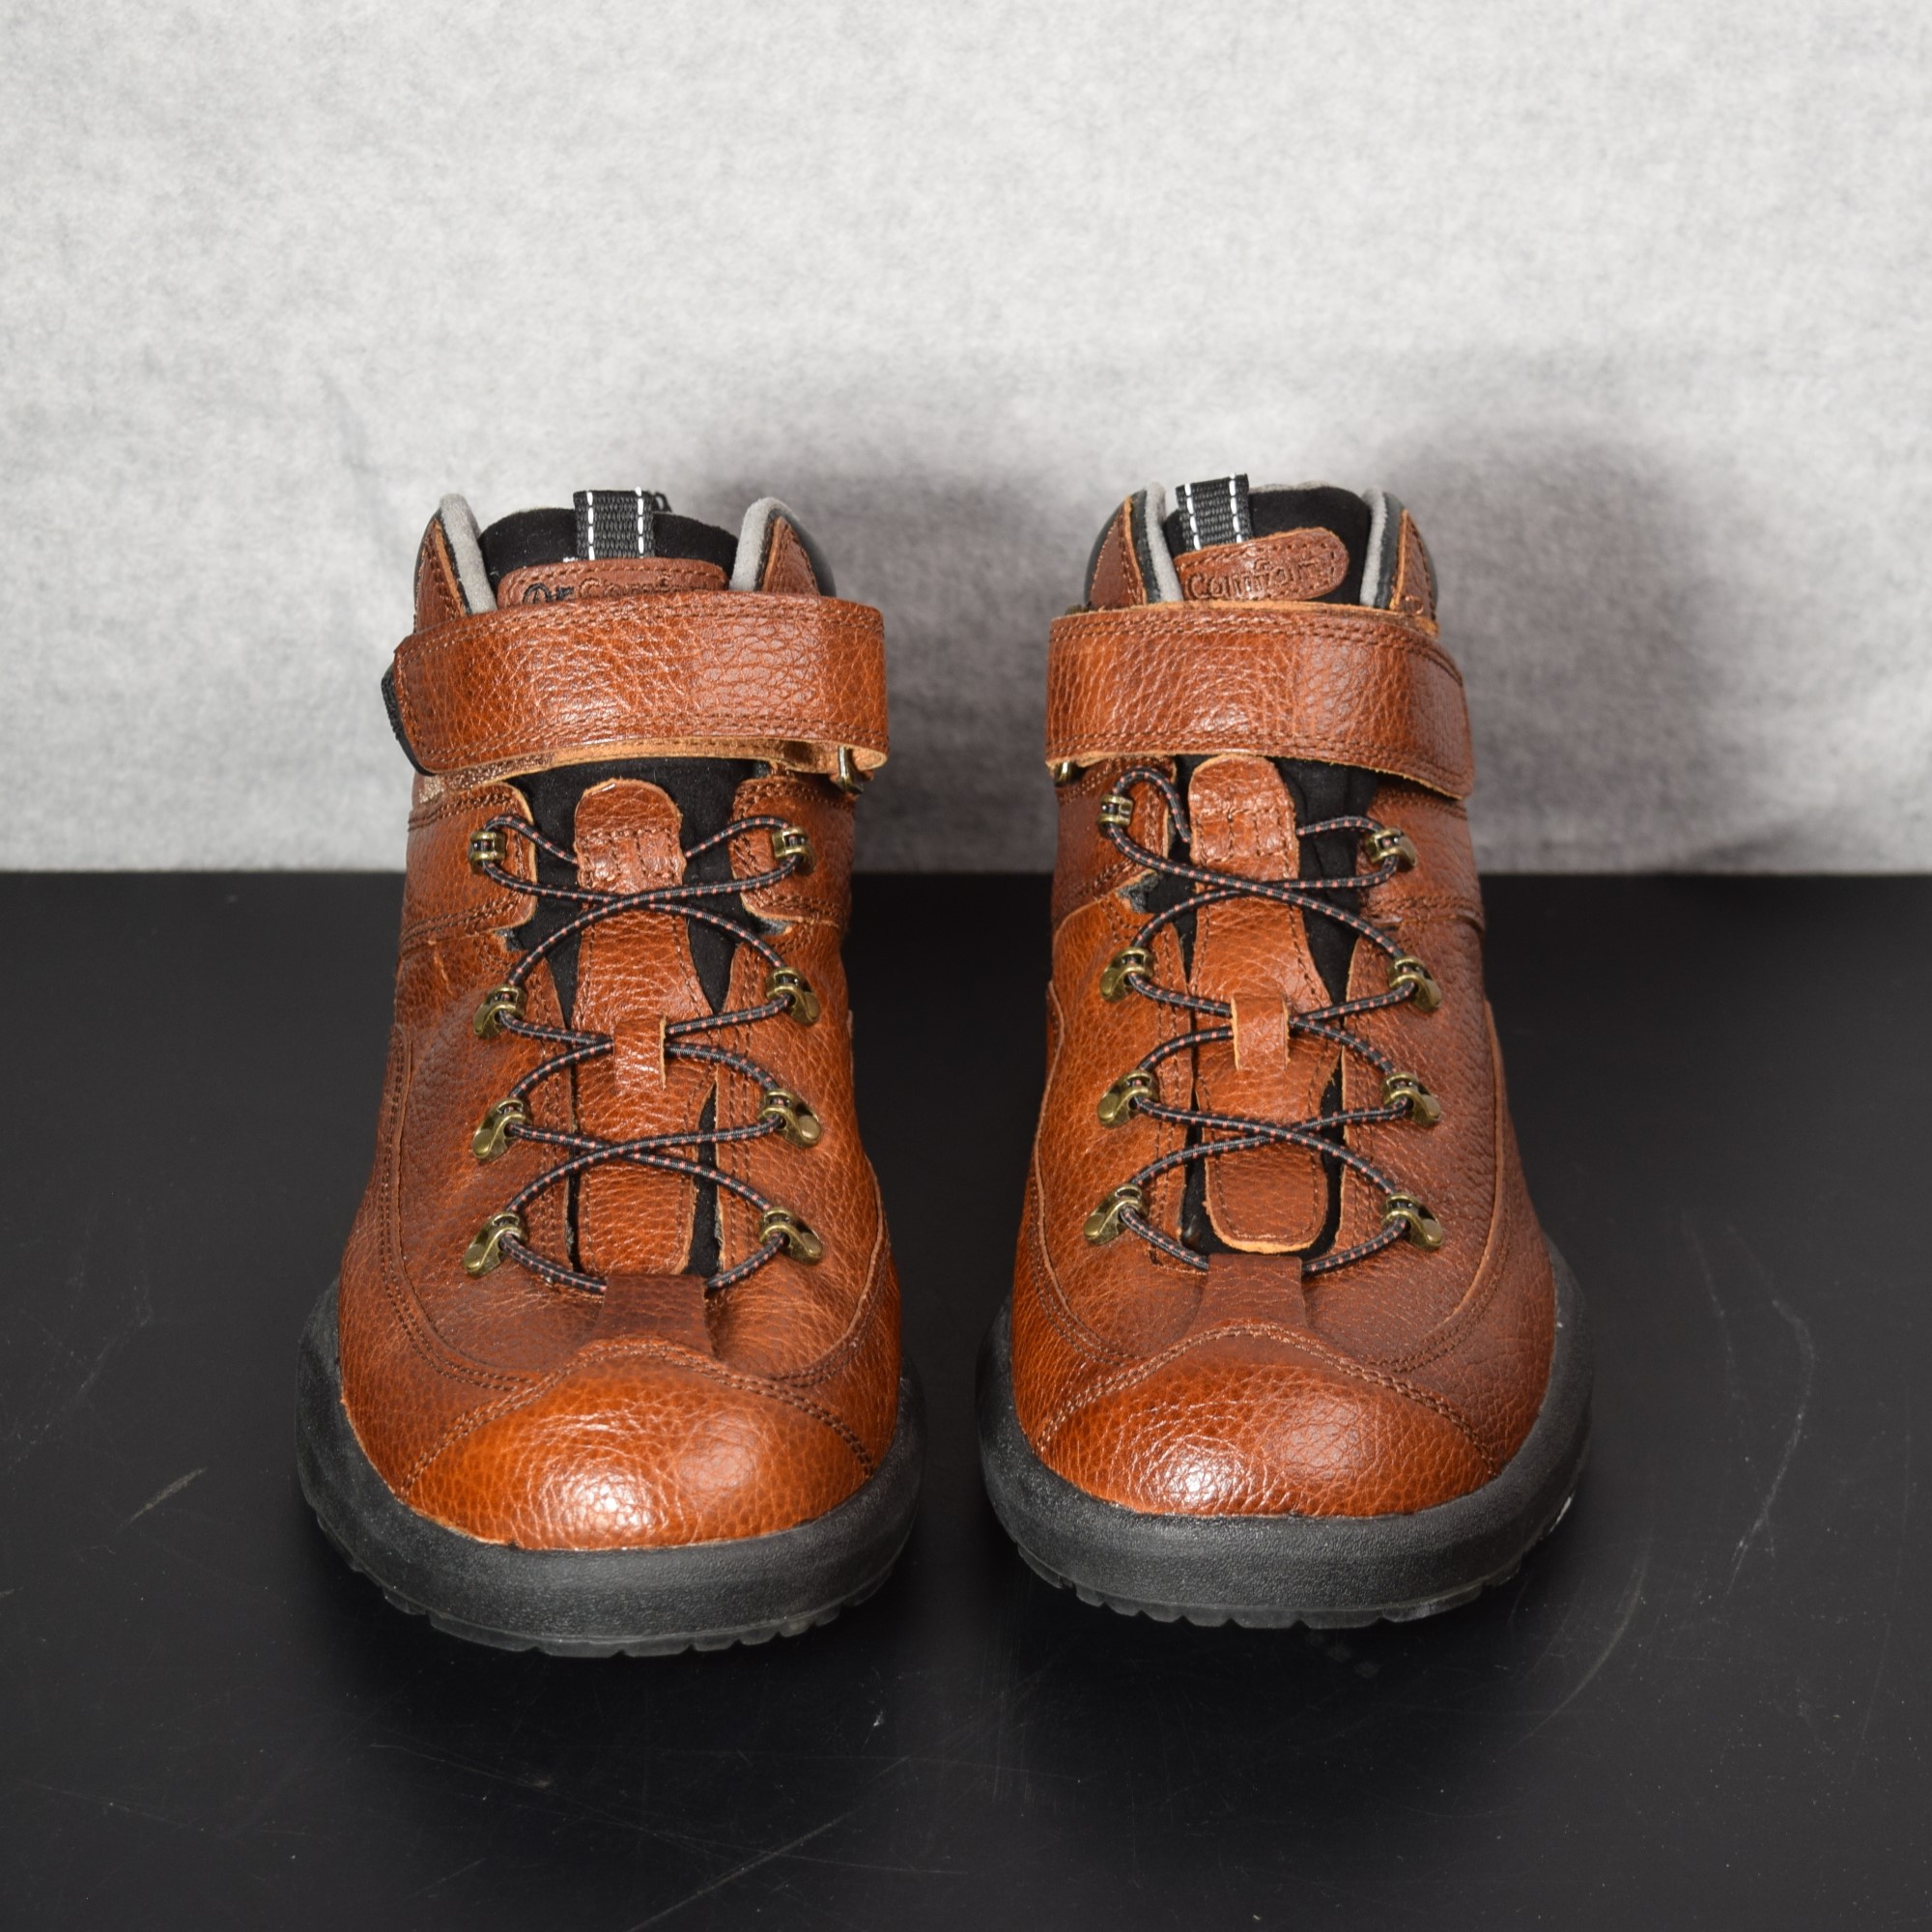 Dr. Comfort Ranger Boots | Abba House Thrift Store of Perry, GA